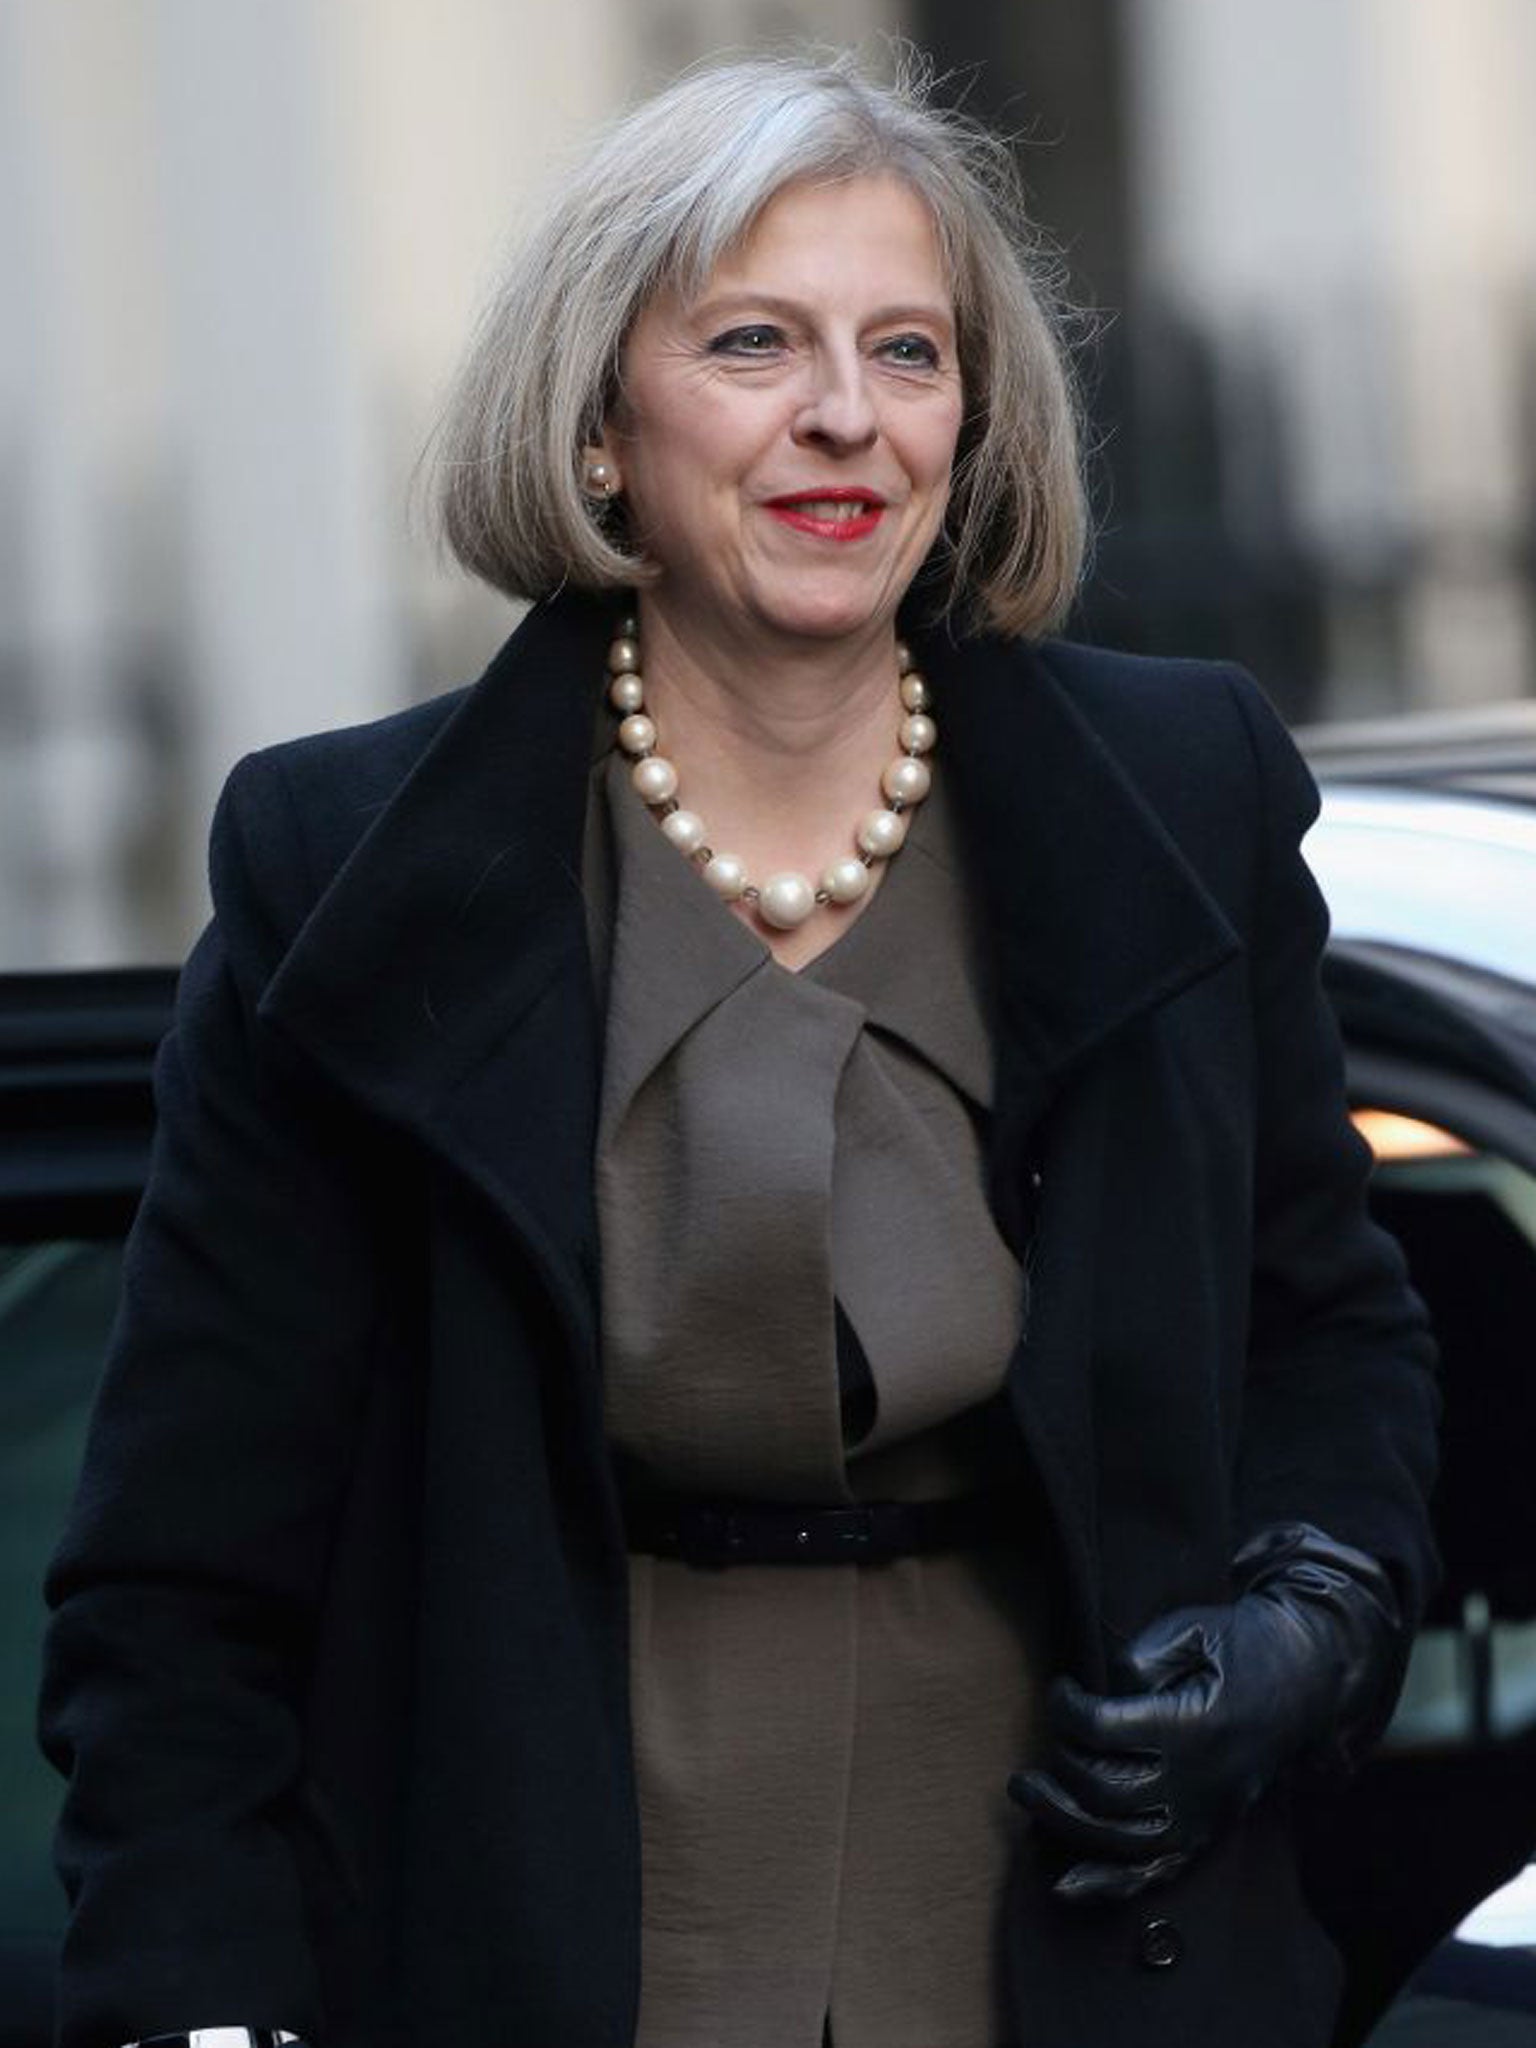 Theresa May is pressing ahead with a controversial scheme to force visitors from 'high-risk' countries in Asia and Africa to pay a 'security bond' of £3,000 before they are allowed into Britain